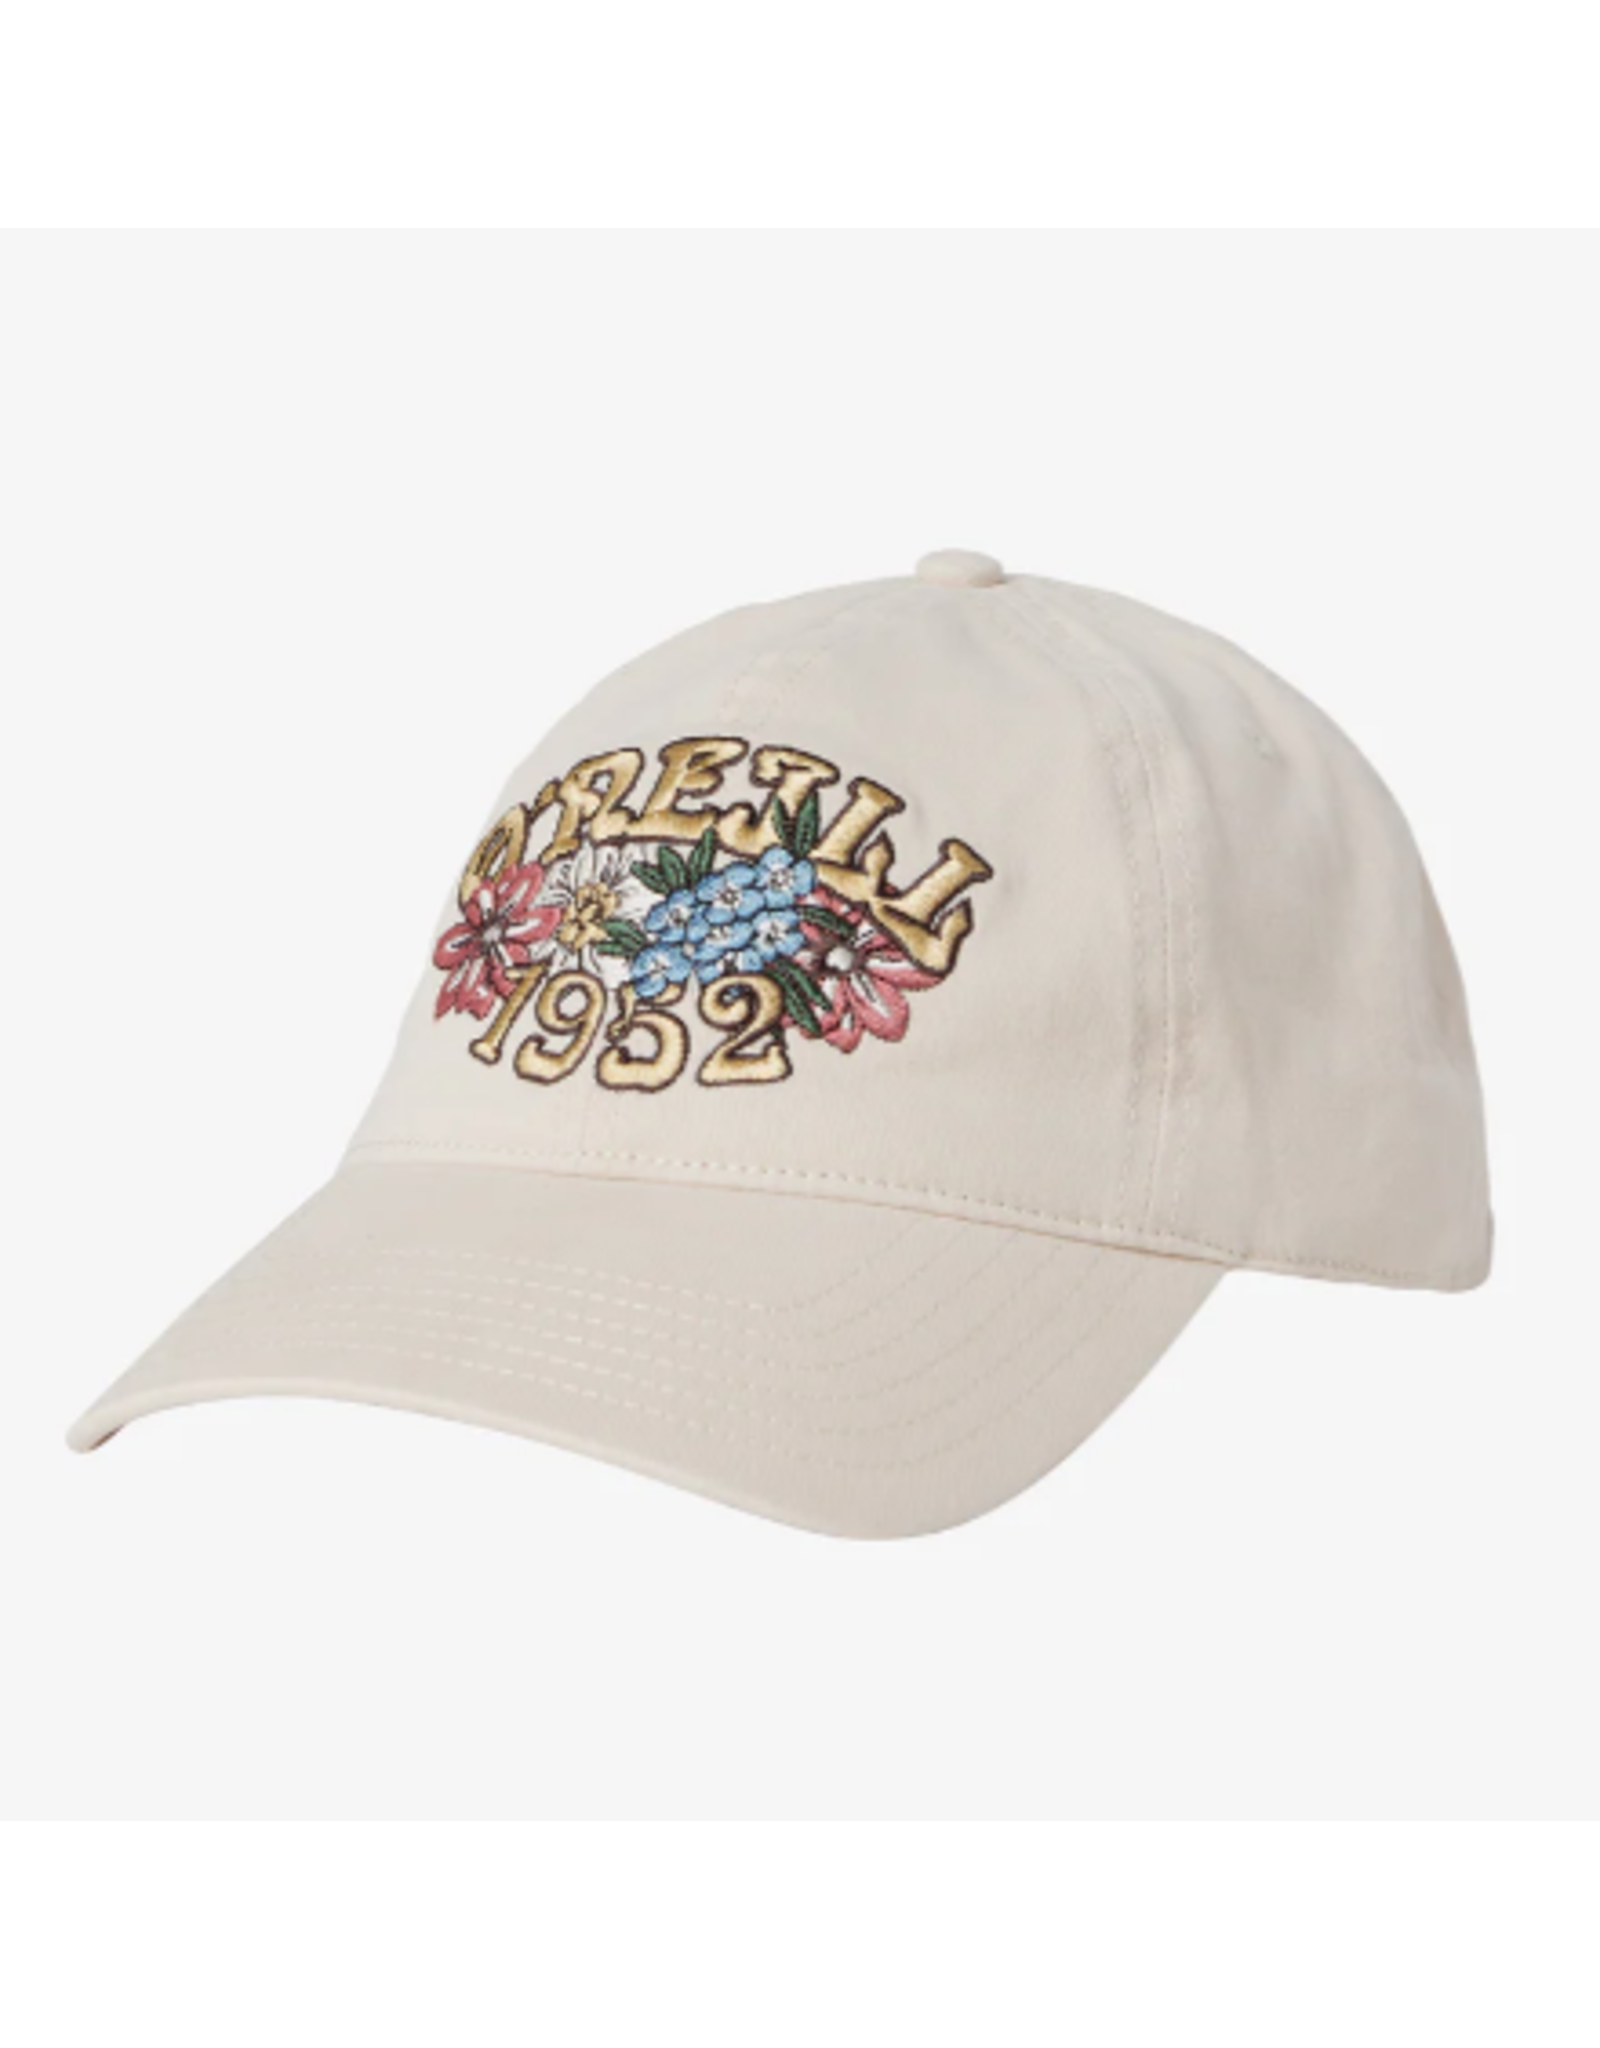 ONEILL IRVING DAD HAT